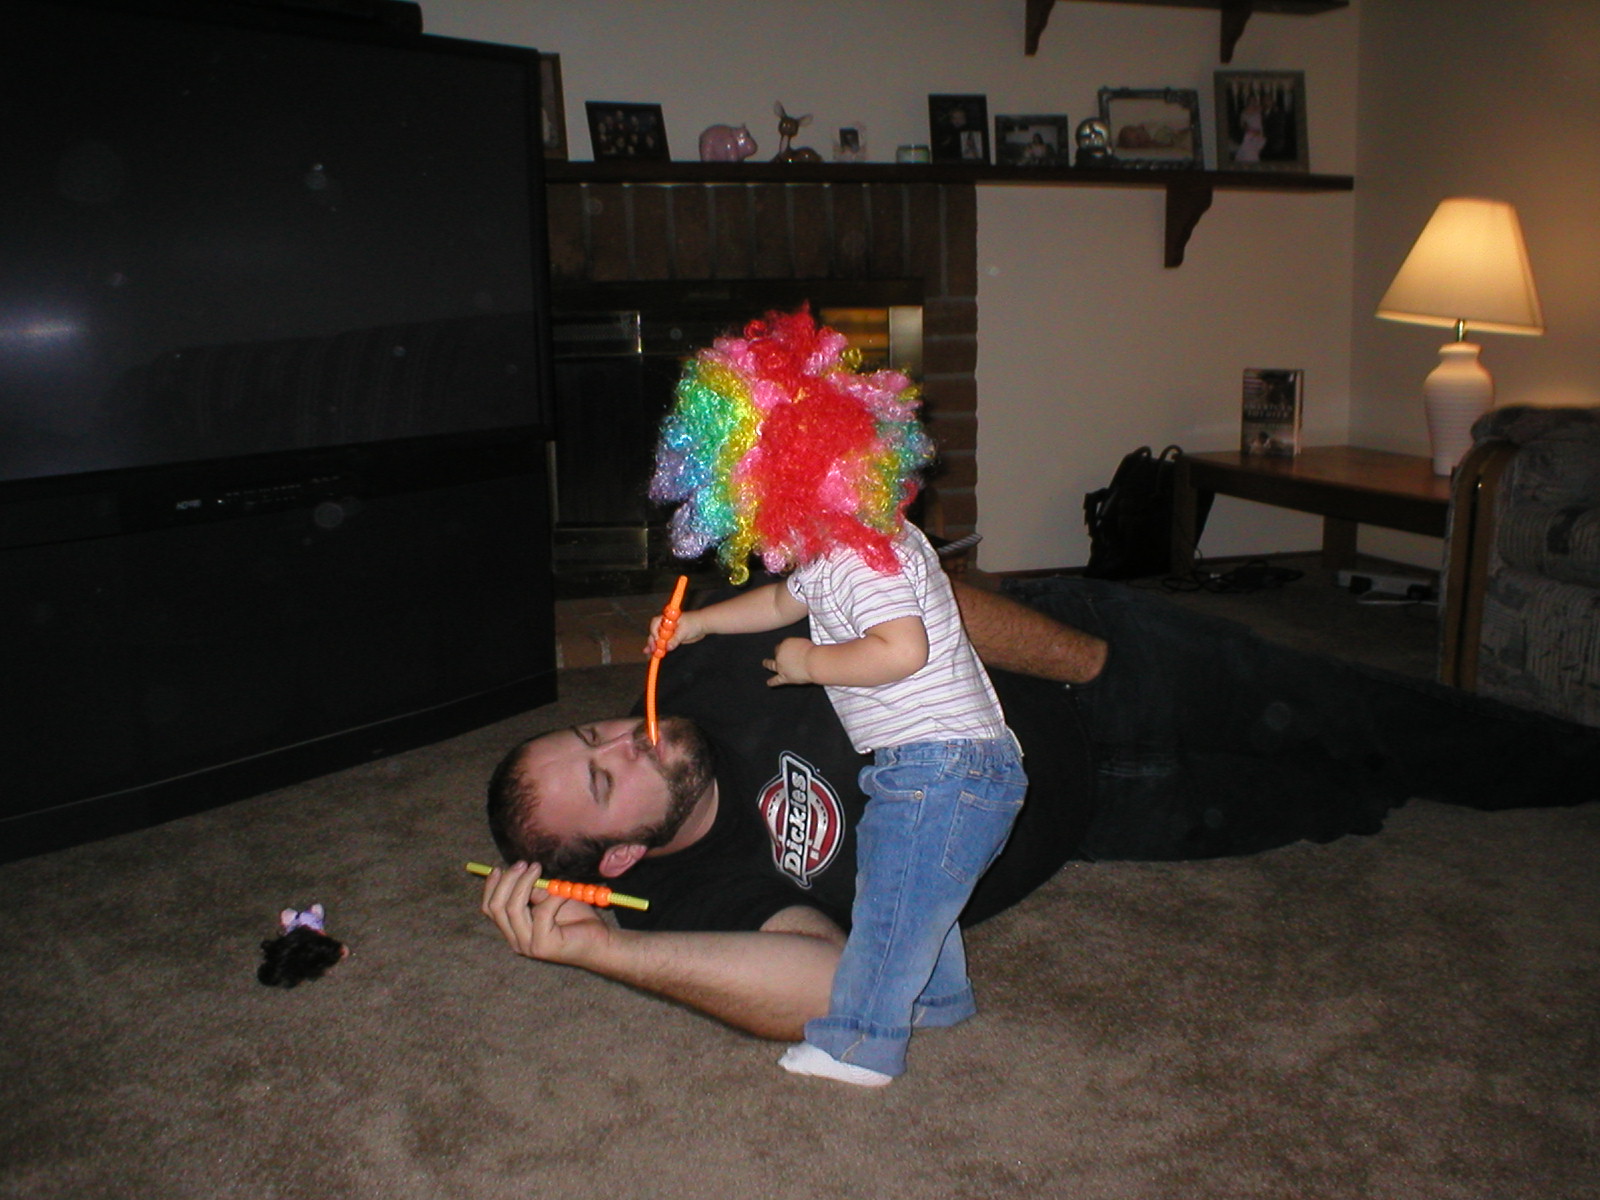 Hanging out with Mike, Being a Crazy Clown!